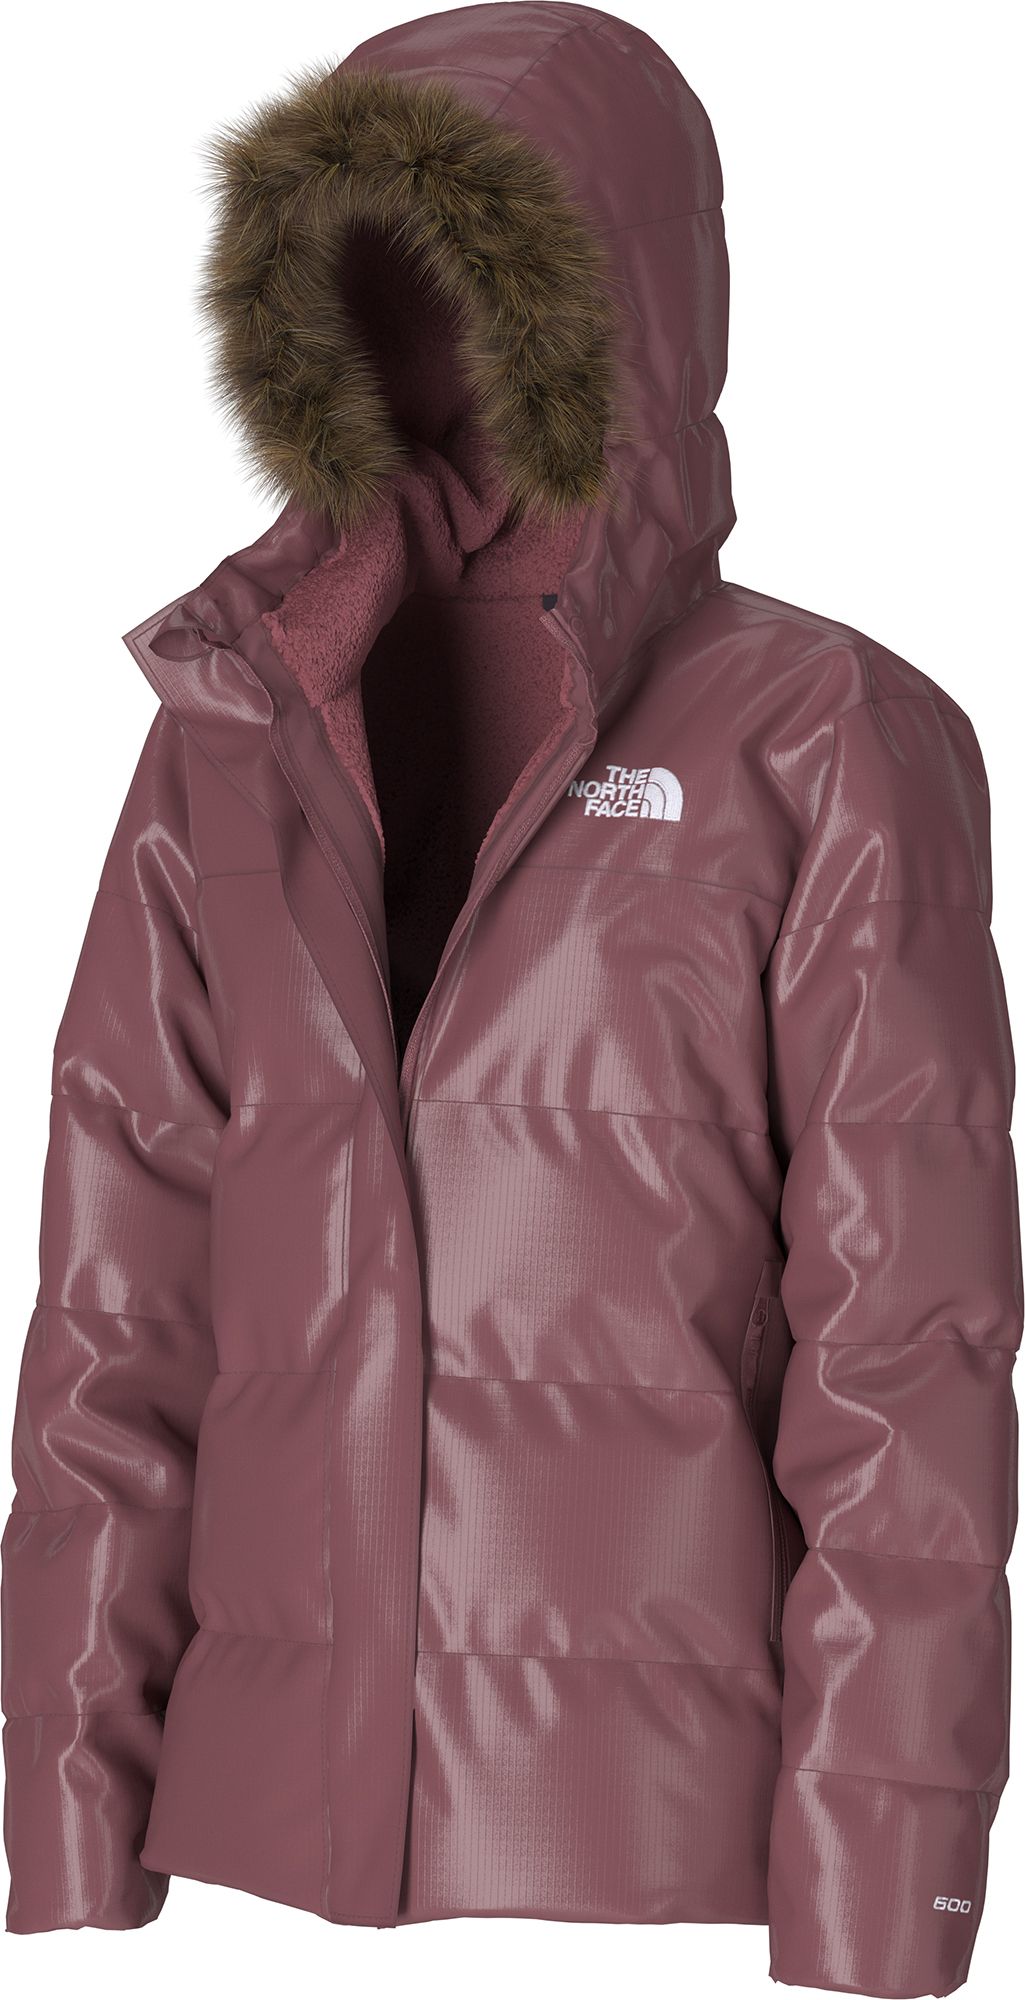 The North Face Girl's Printed Down Fleece-Lined Parka